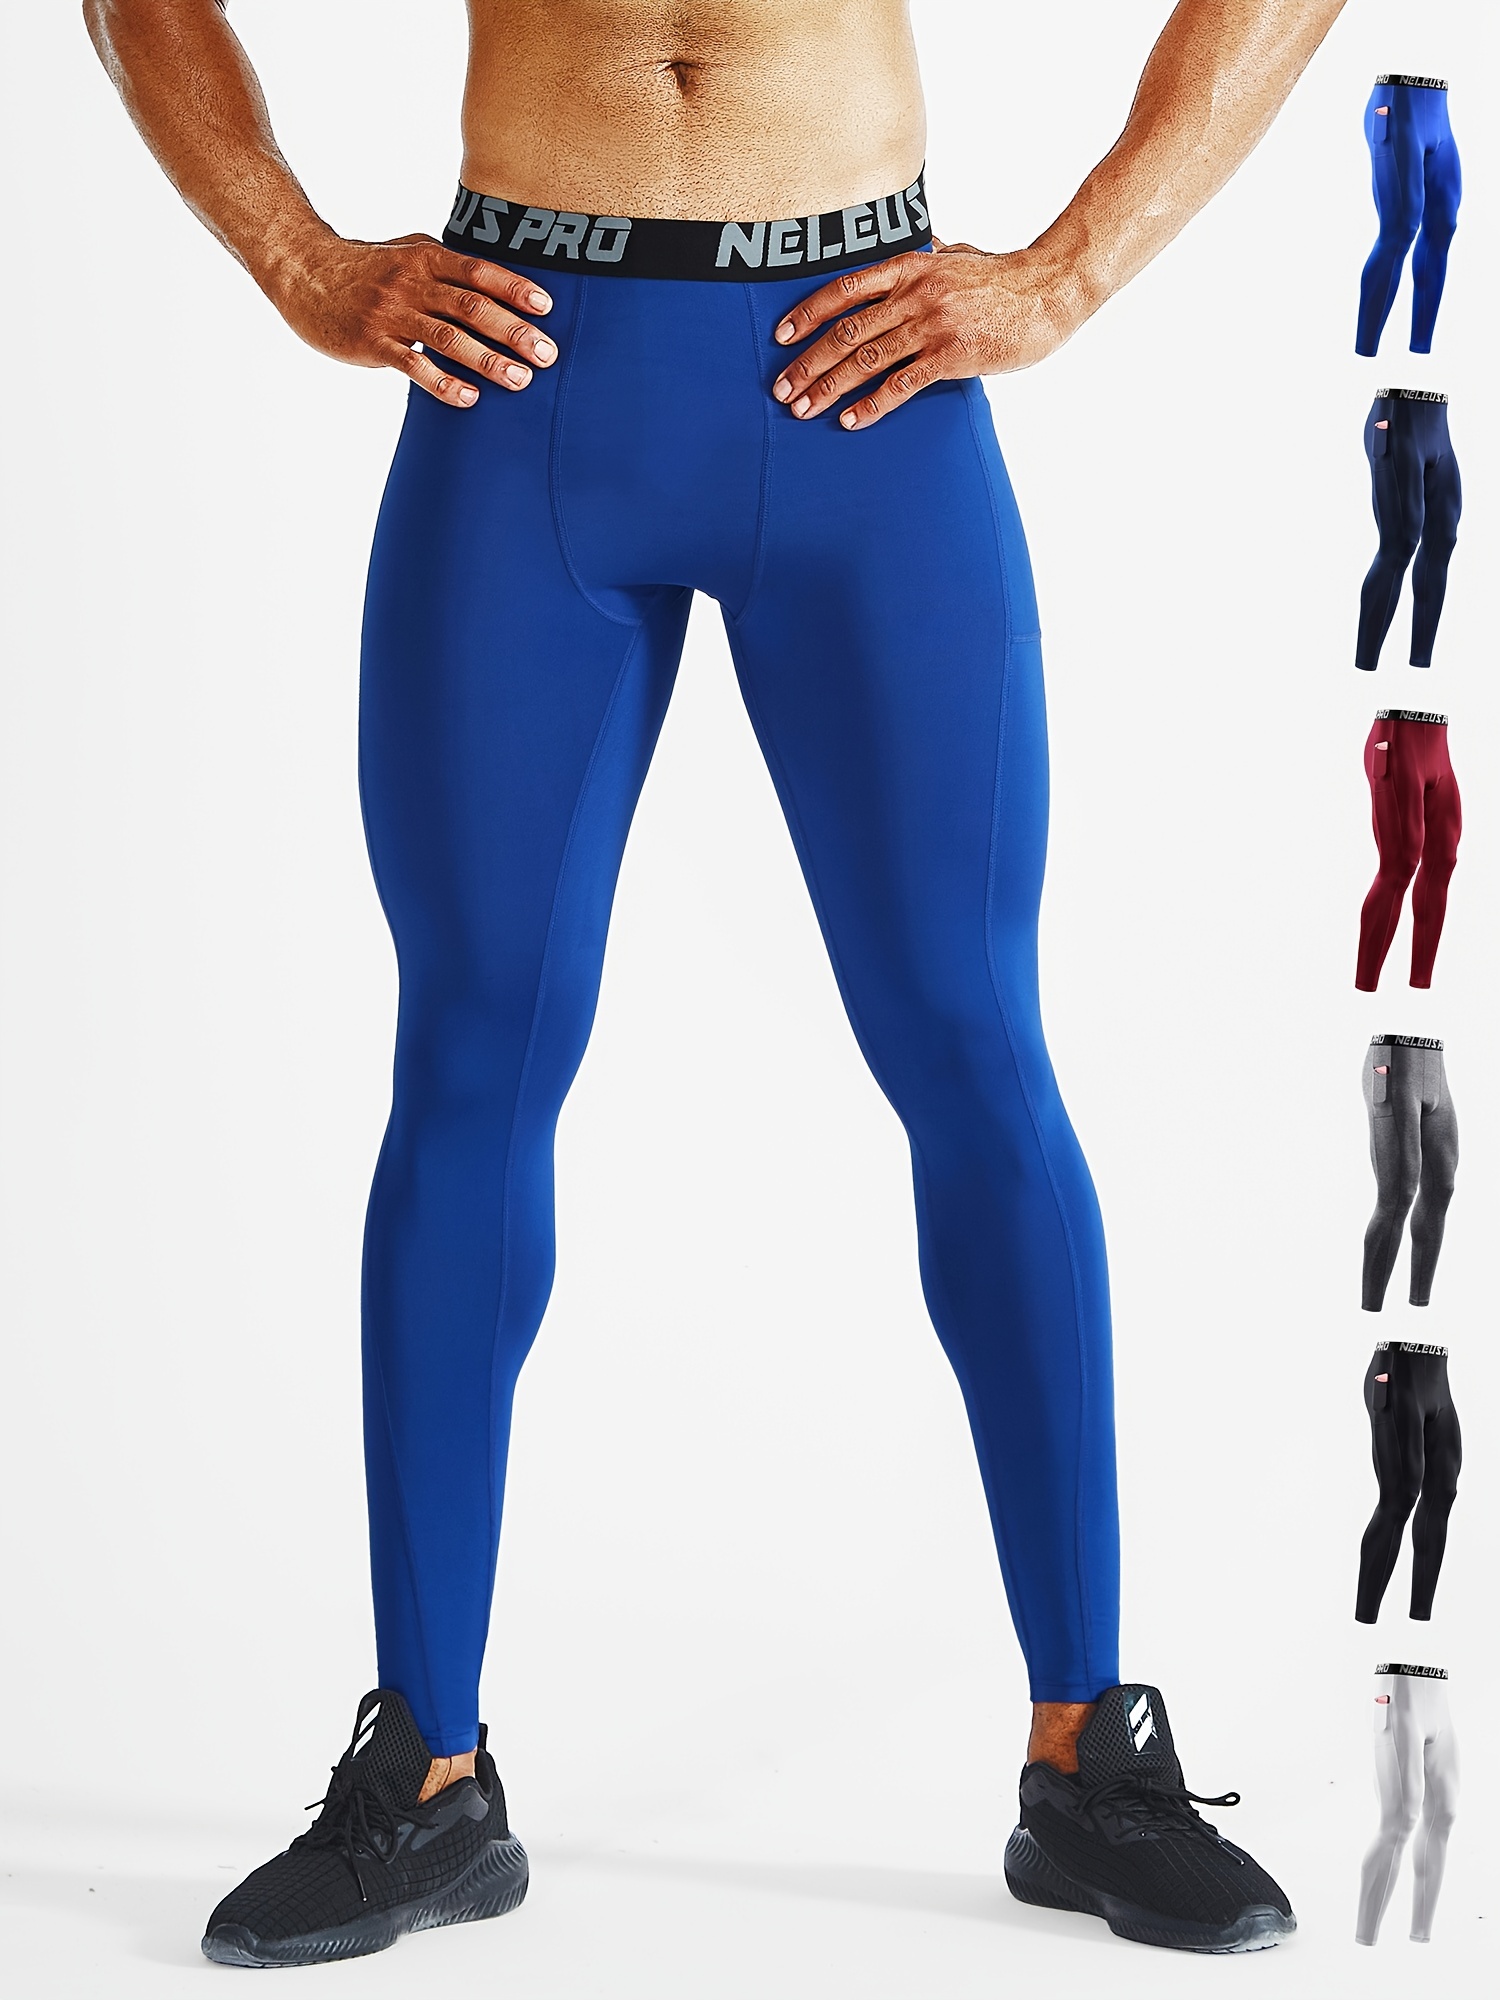 Plus Size Men's Breathable Stretchy Pro Compression Pants Running